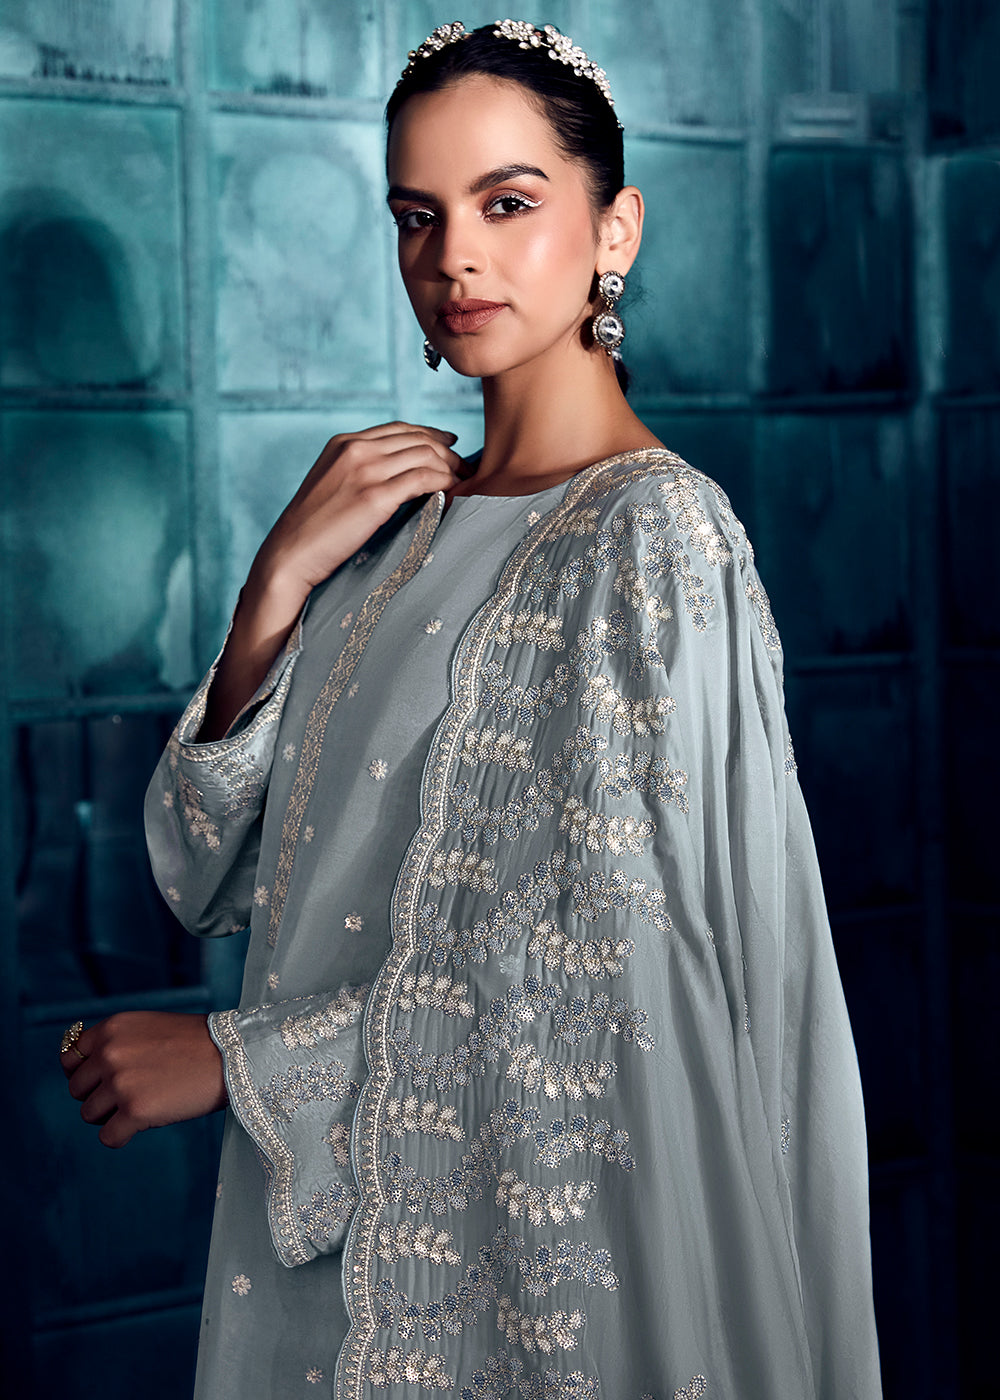 Buy Now Charming Grey Modale Silk Embroidered Festive Salwar Suit Online in USA, UK, Canada, Germany, Australia & Worldwide at Empress Clothing.